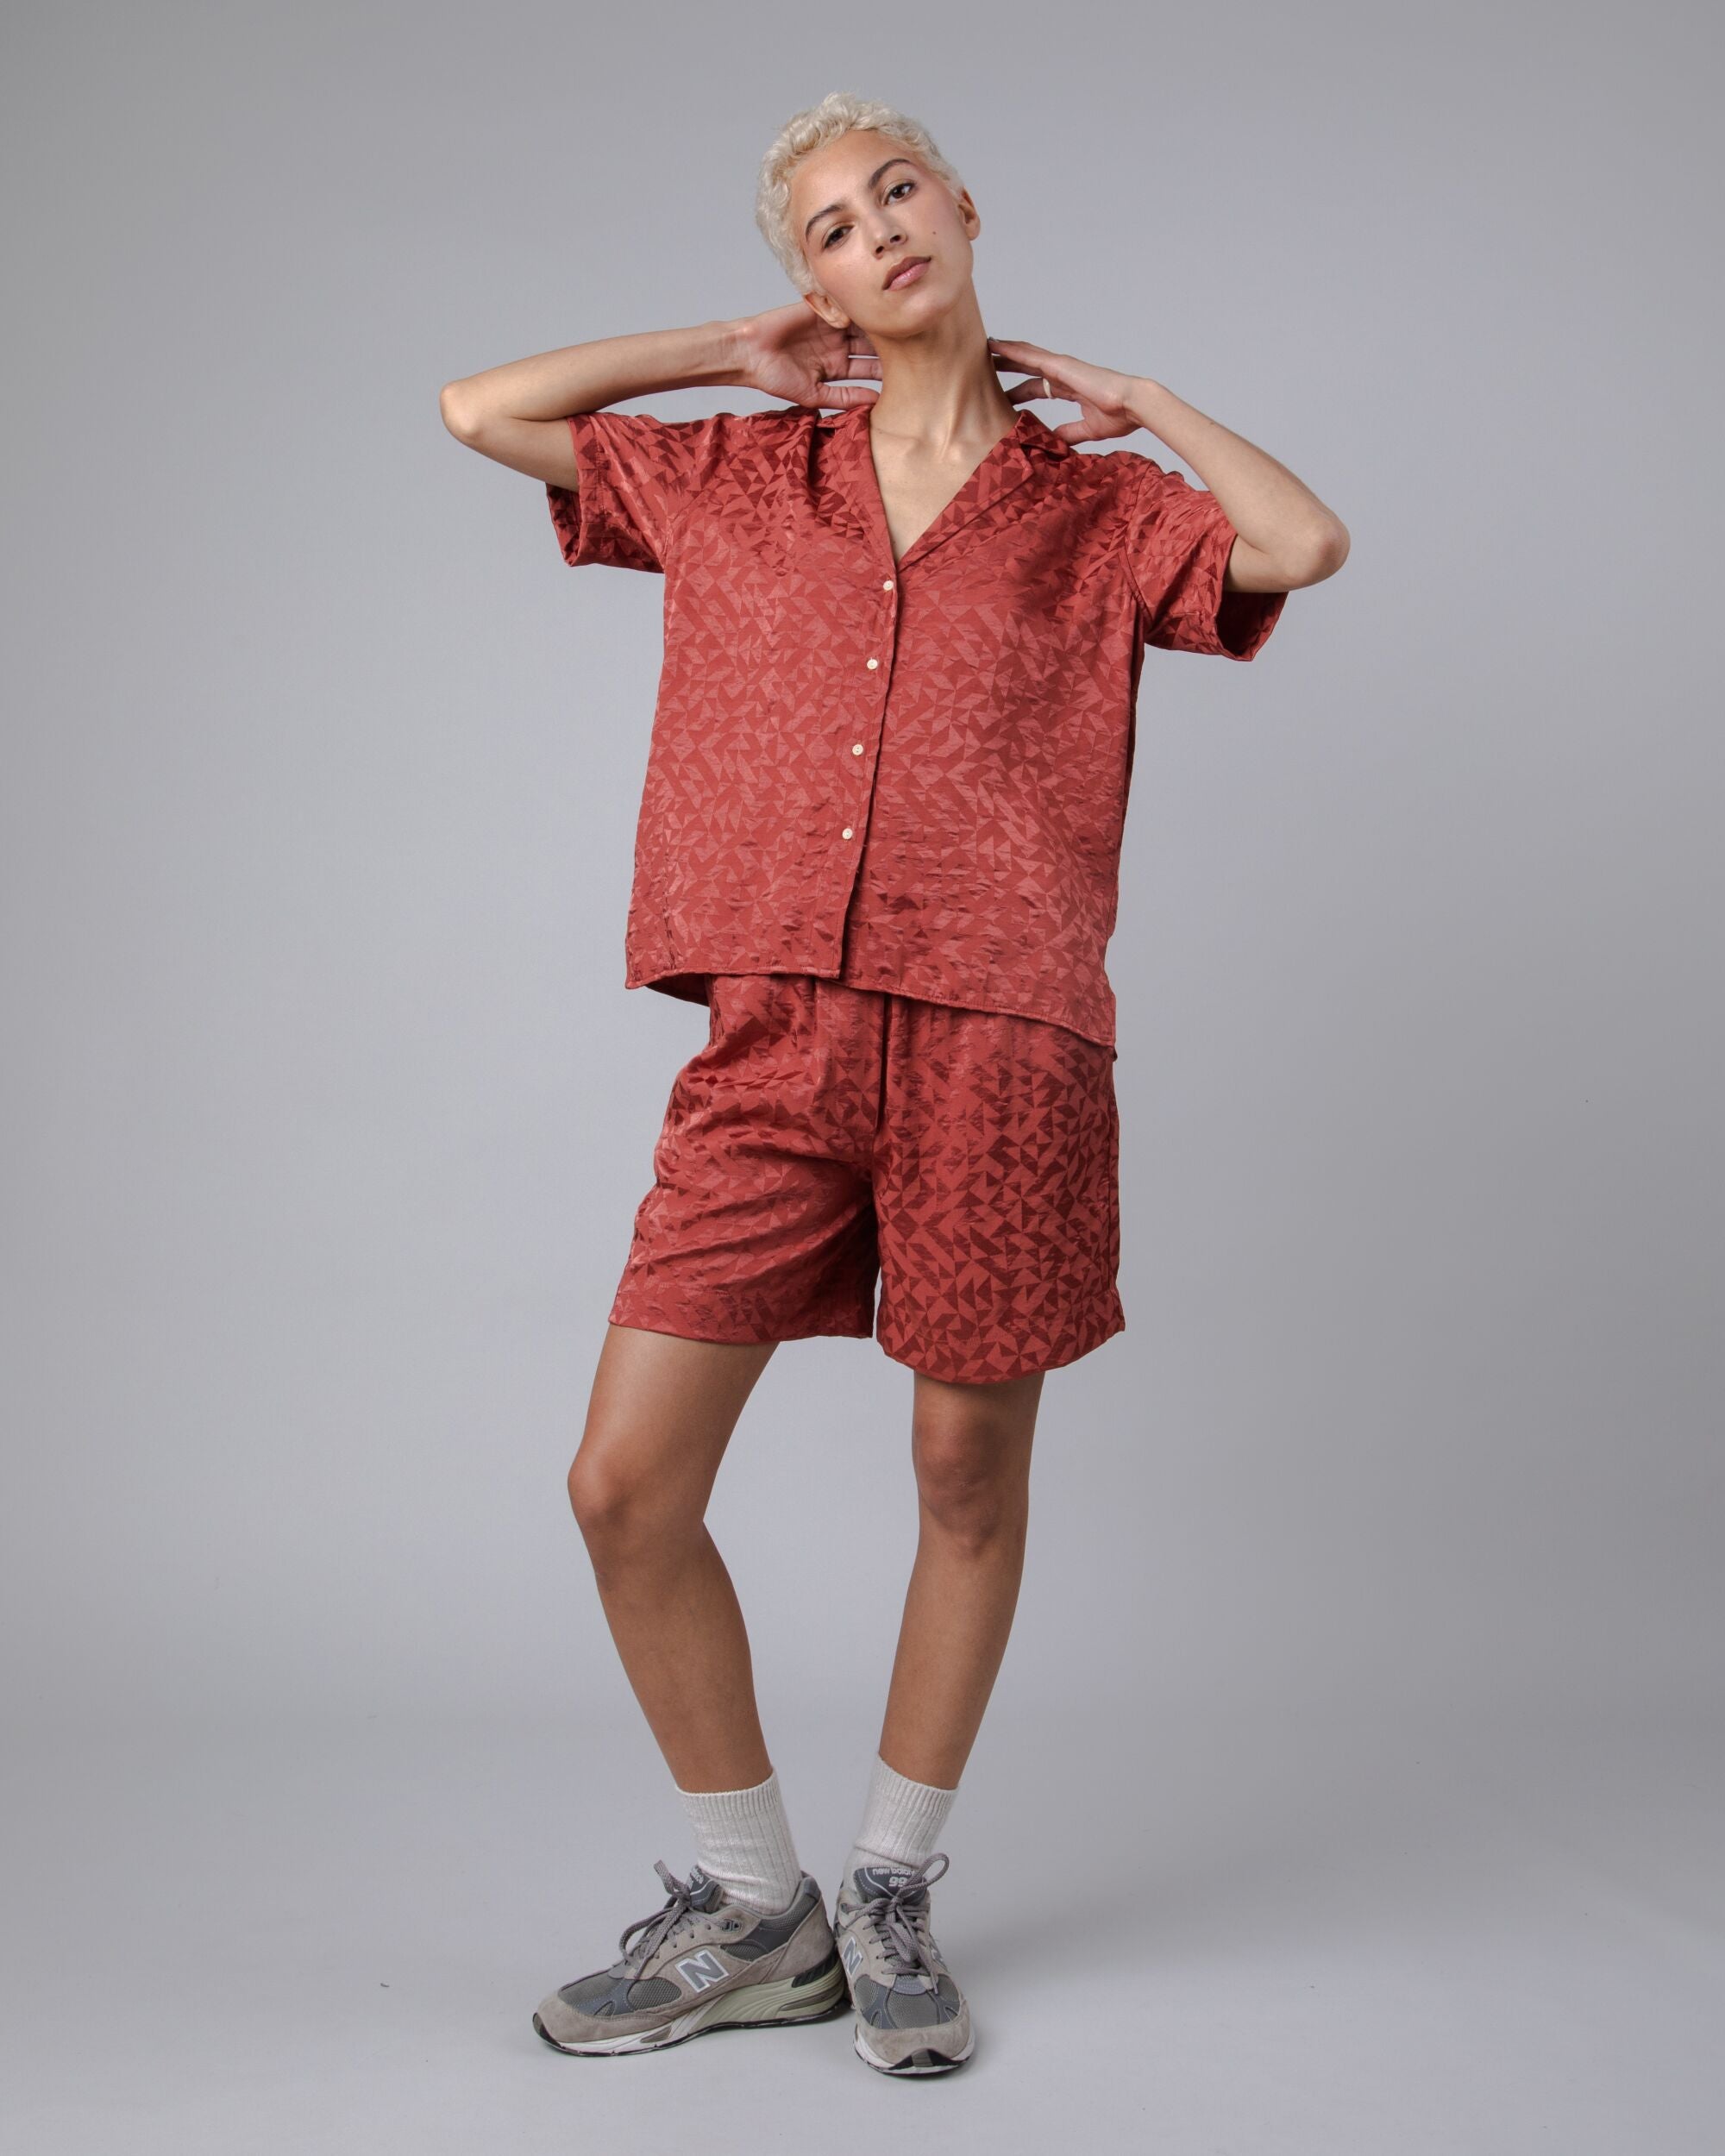 Red short-sleeved blouse Jacquard Aloha made from sustainable polyester from Brava Fabrics